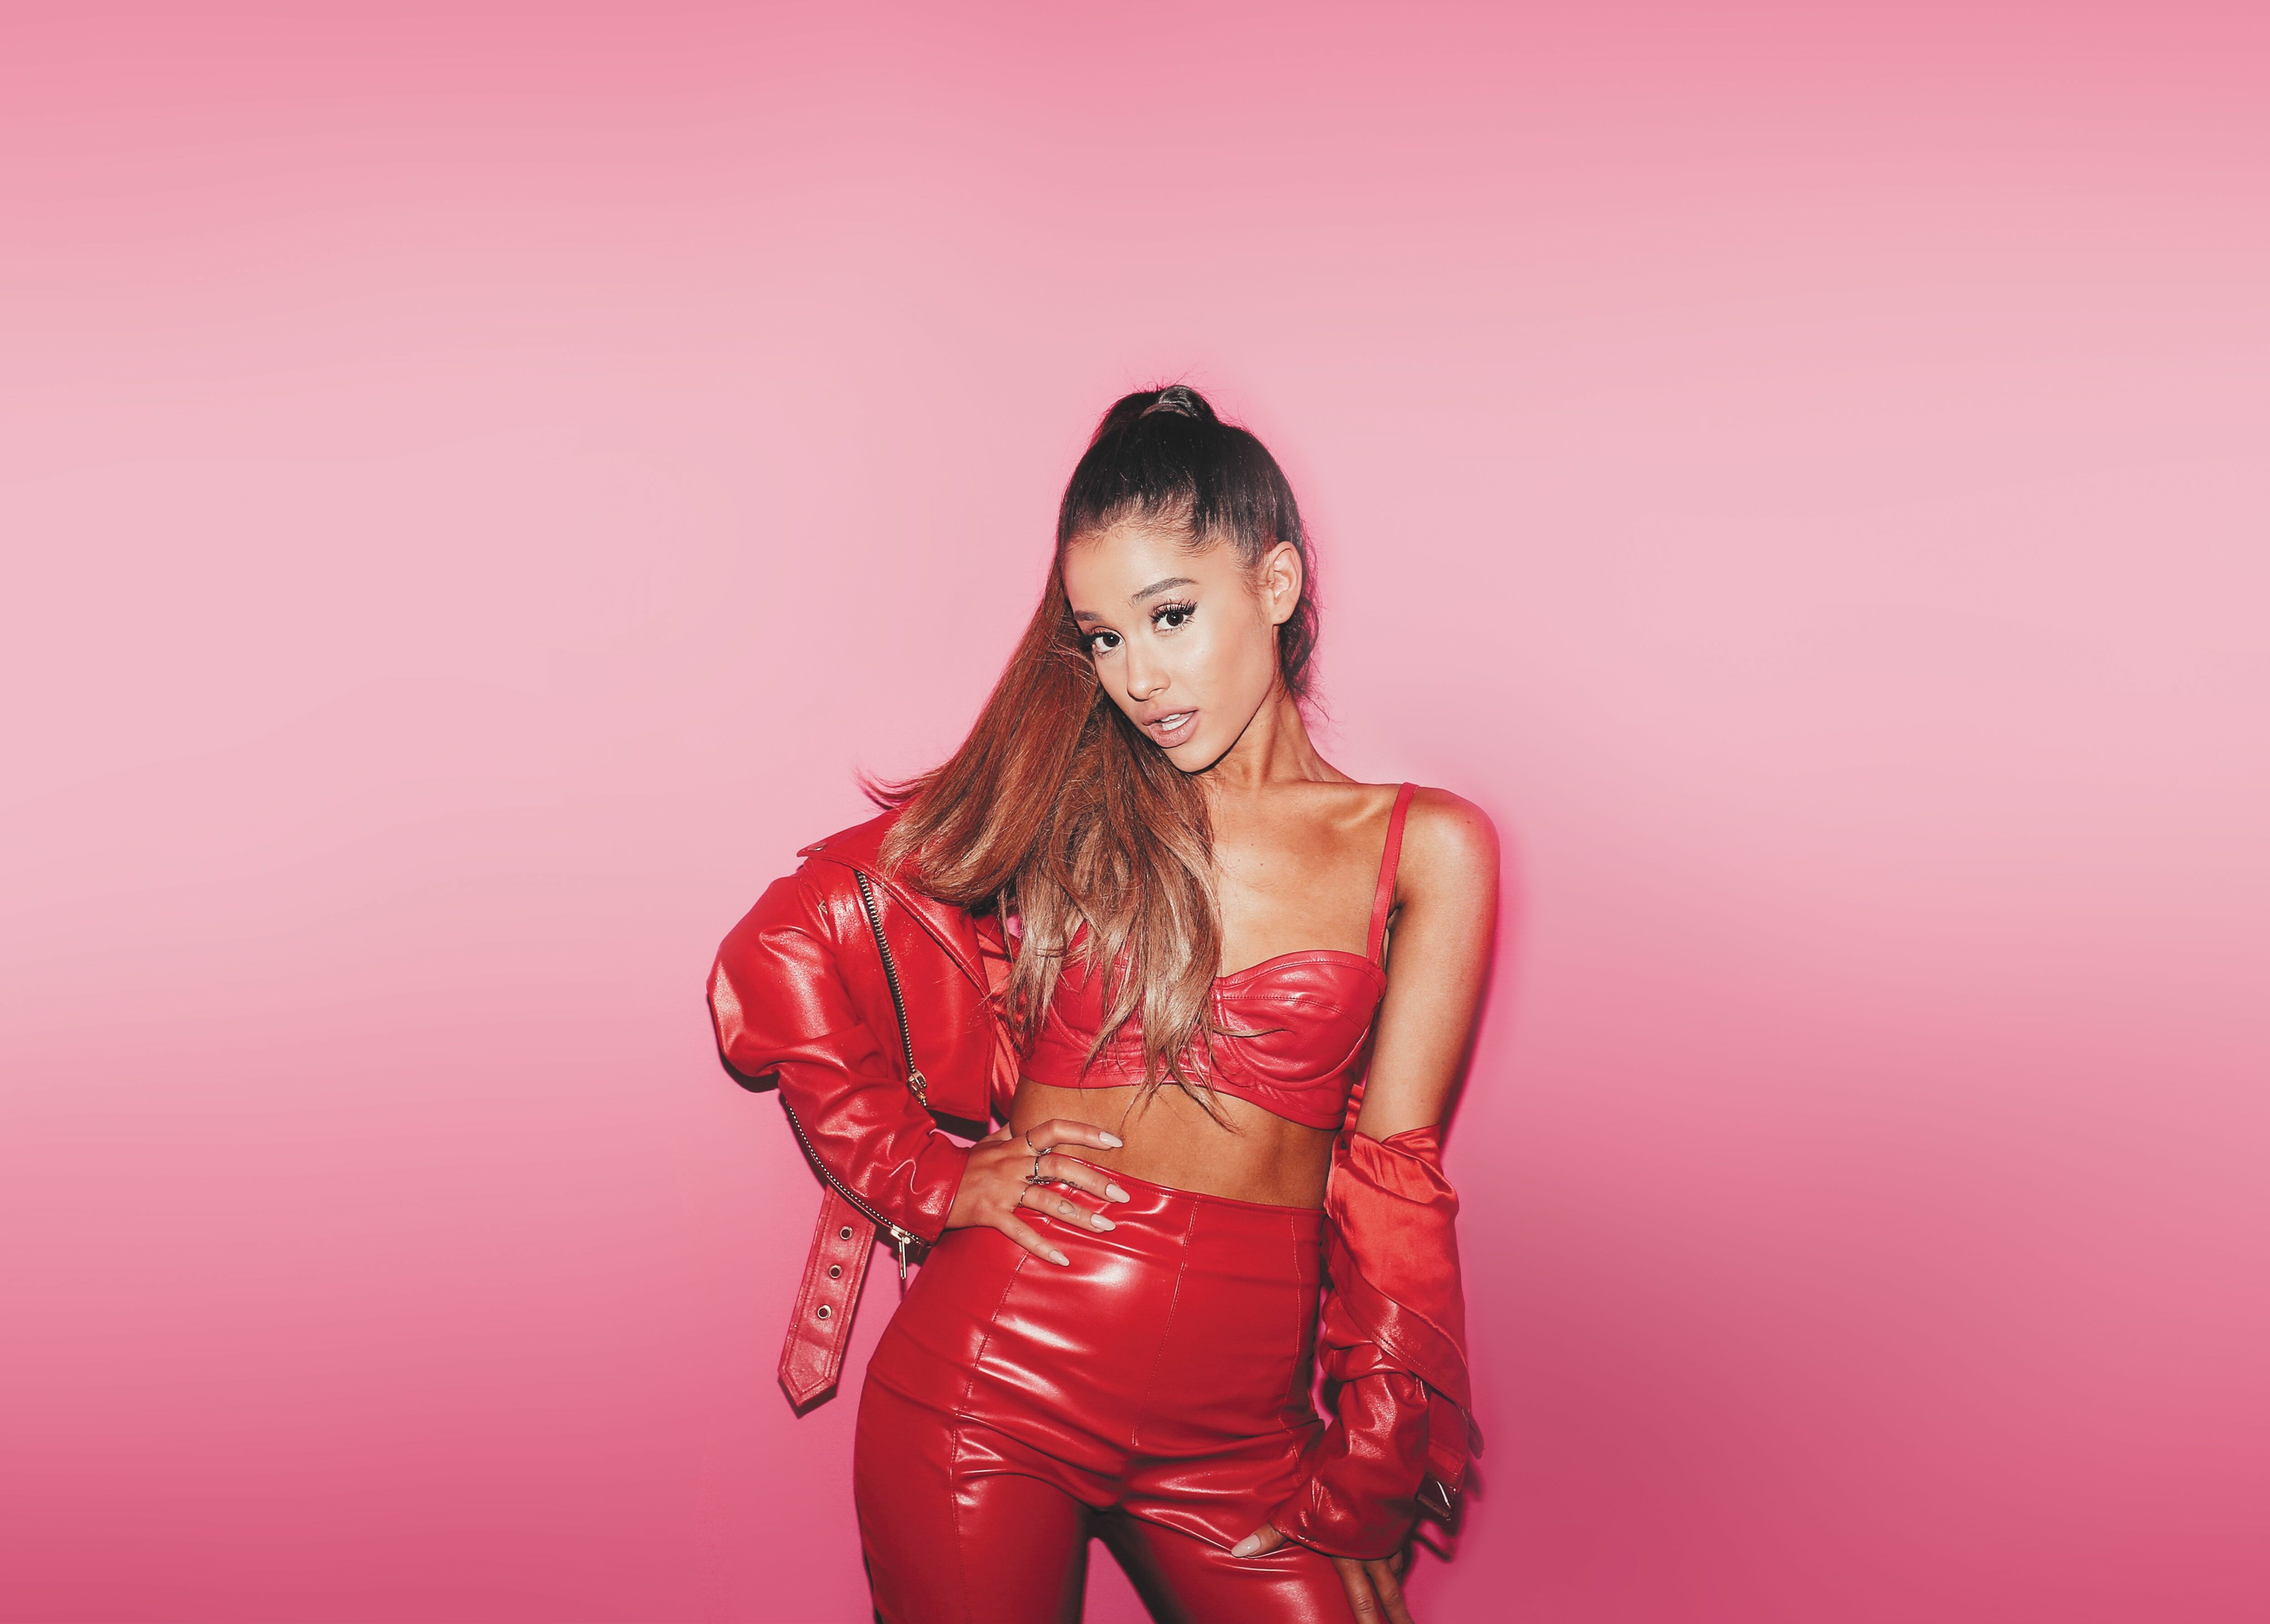 48+ Ariana Grande Wallpapers: HD, 4K, 5K for PC and Mobile | Download free  images for iPhone, Android